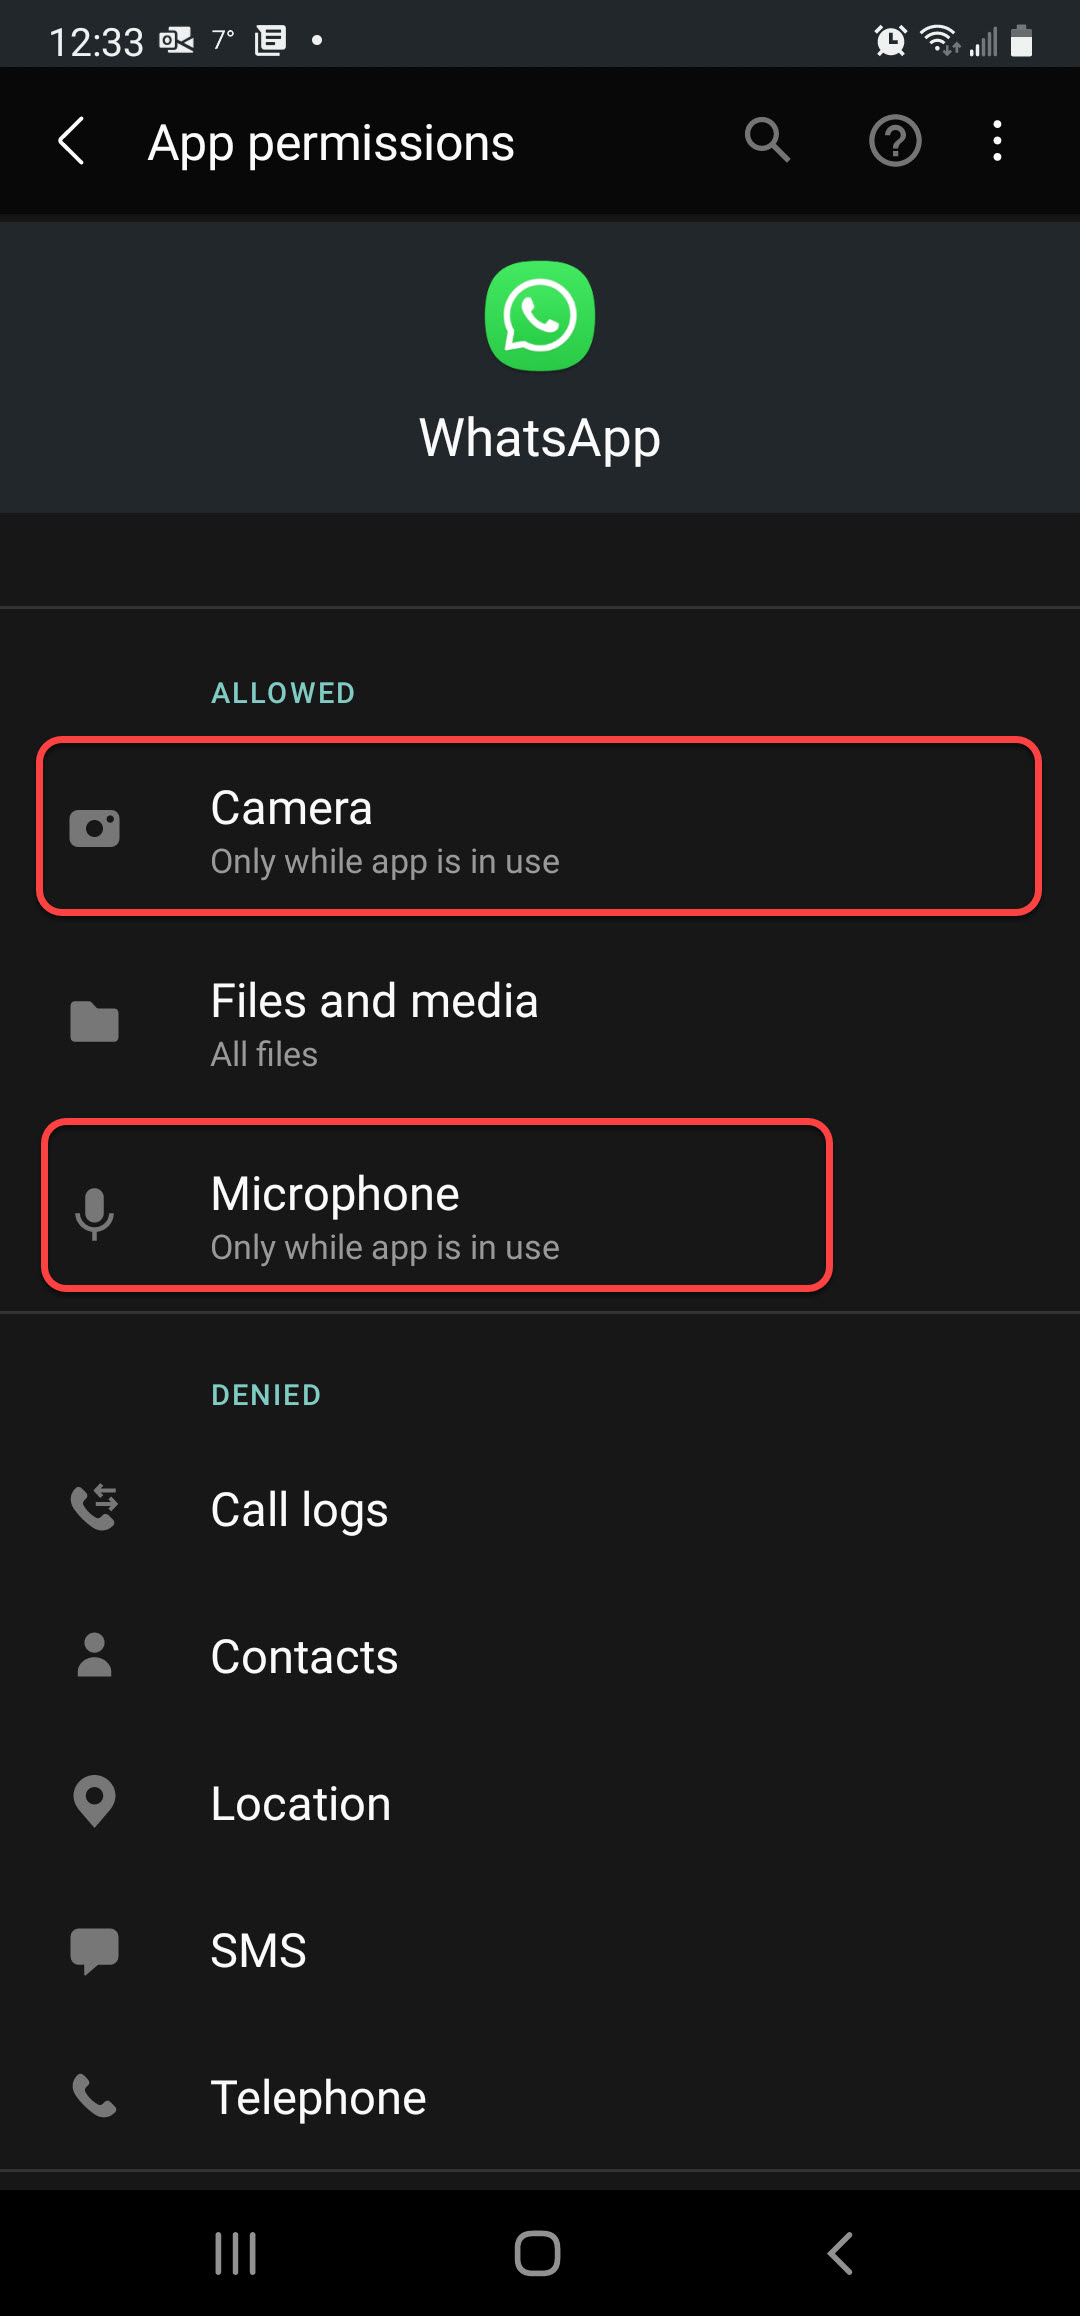 WhatsApp Permissions on Android